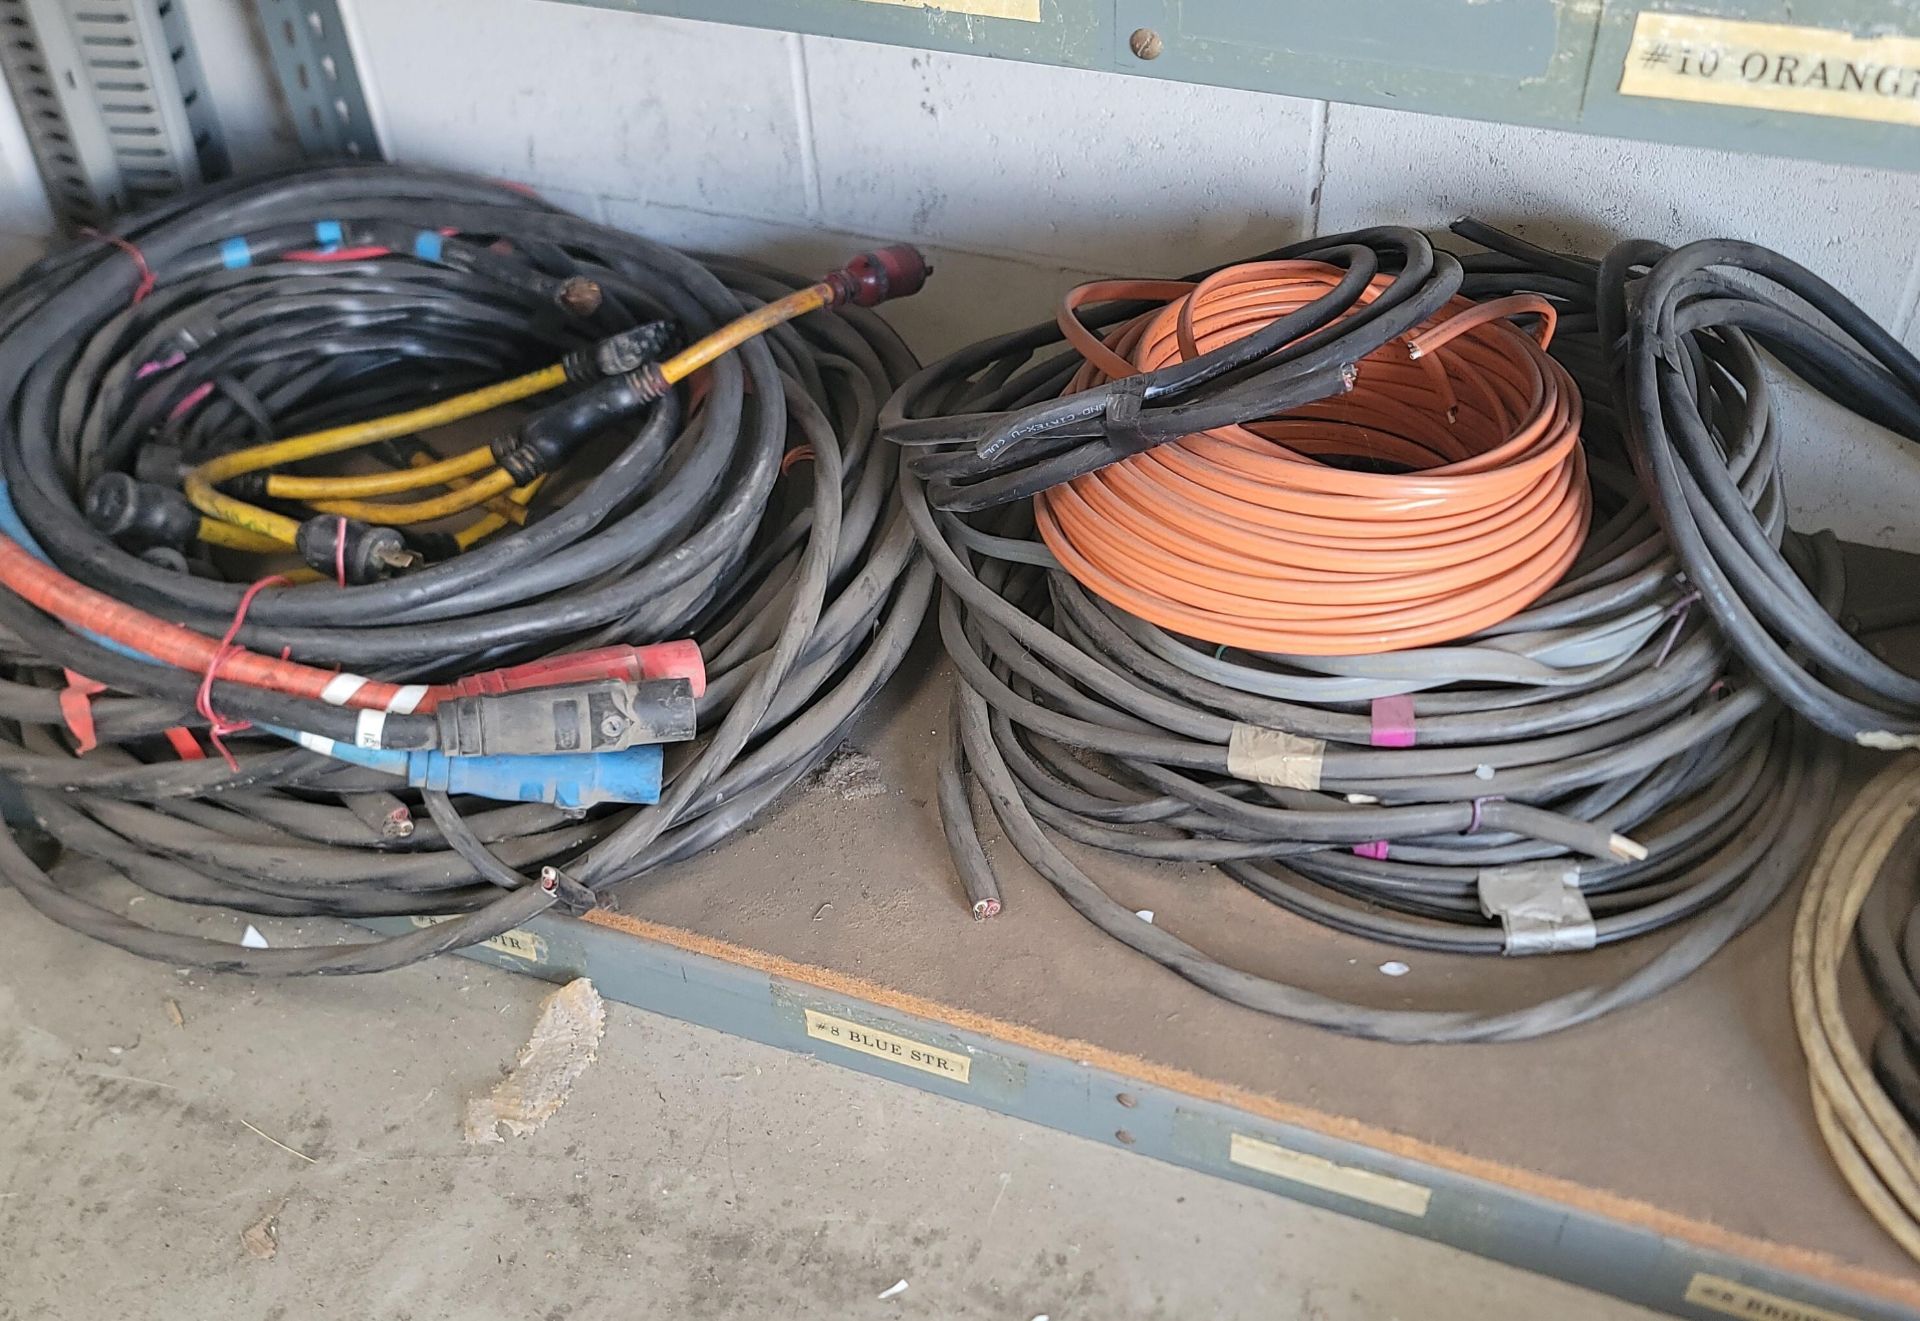 LOT - ELECTRIC CABLE, ROMEX, ETC. - Image 3 of 5